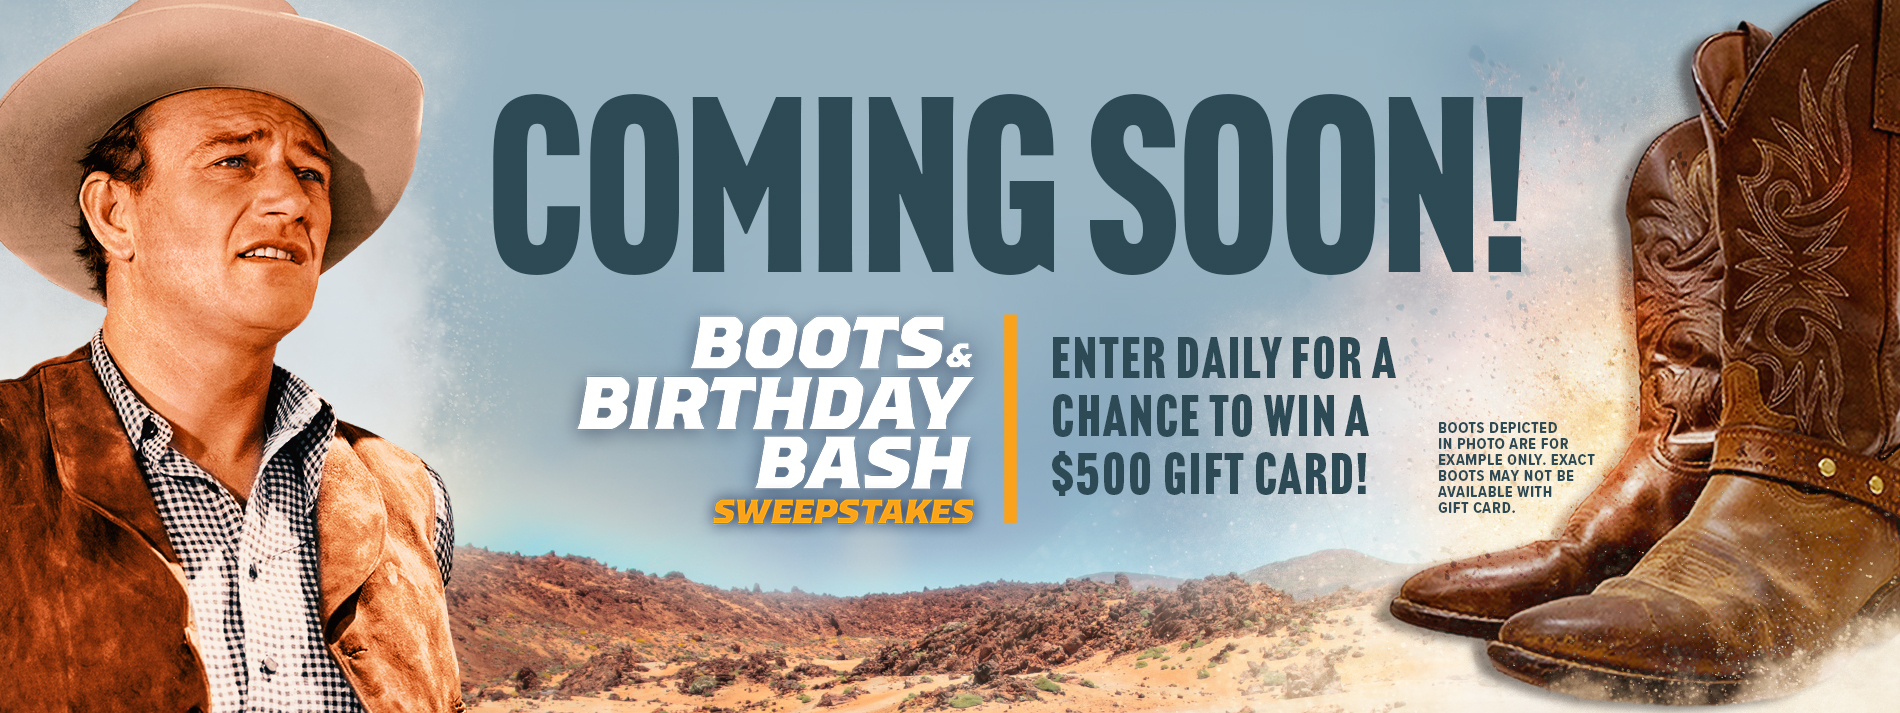 Boots & Birthday Bash Sweepstakes Coming Soon